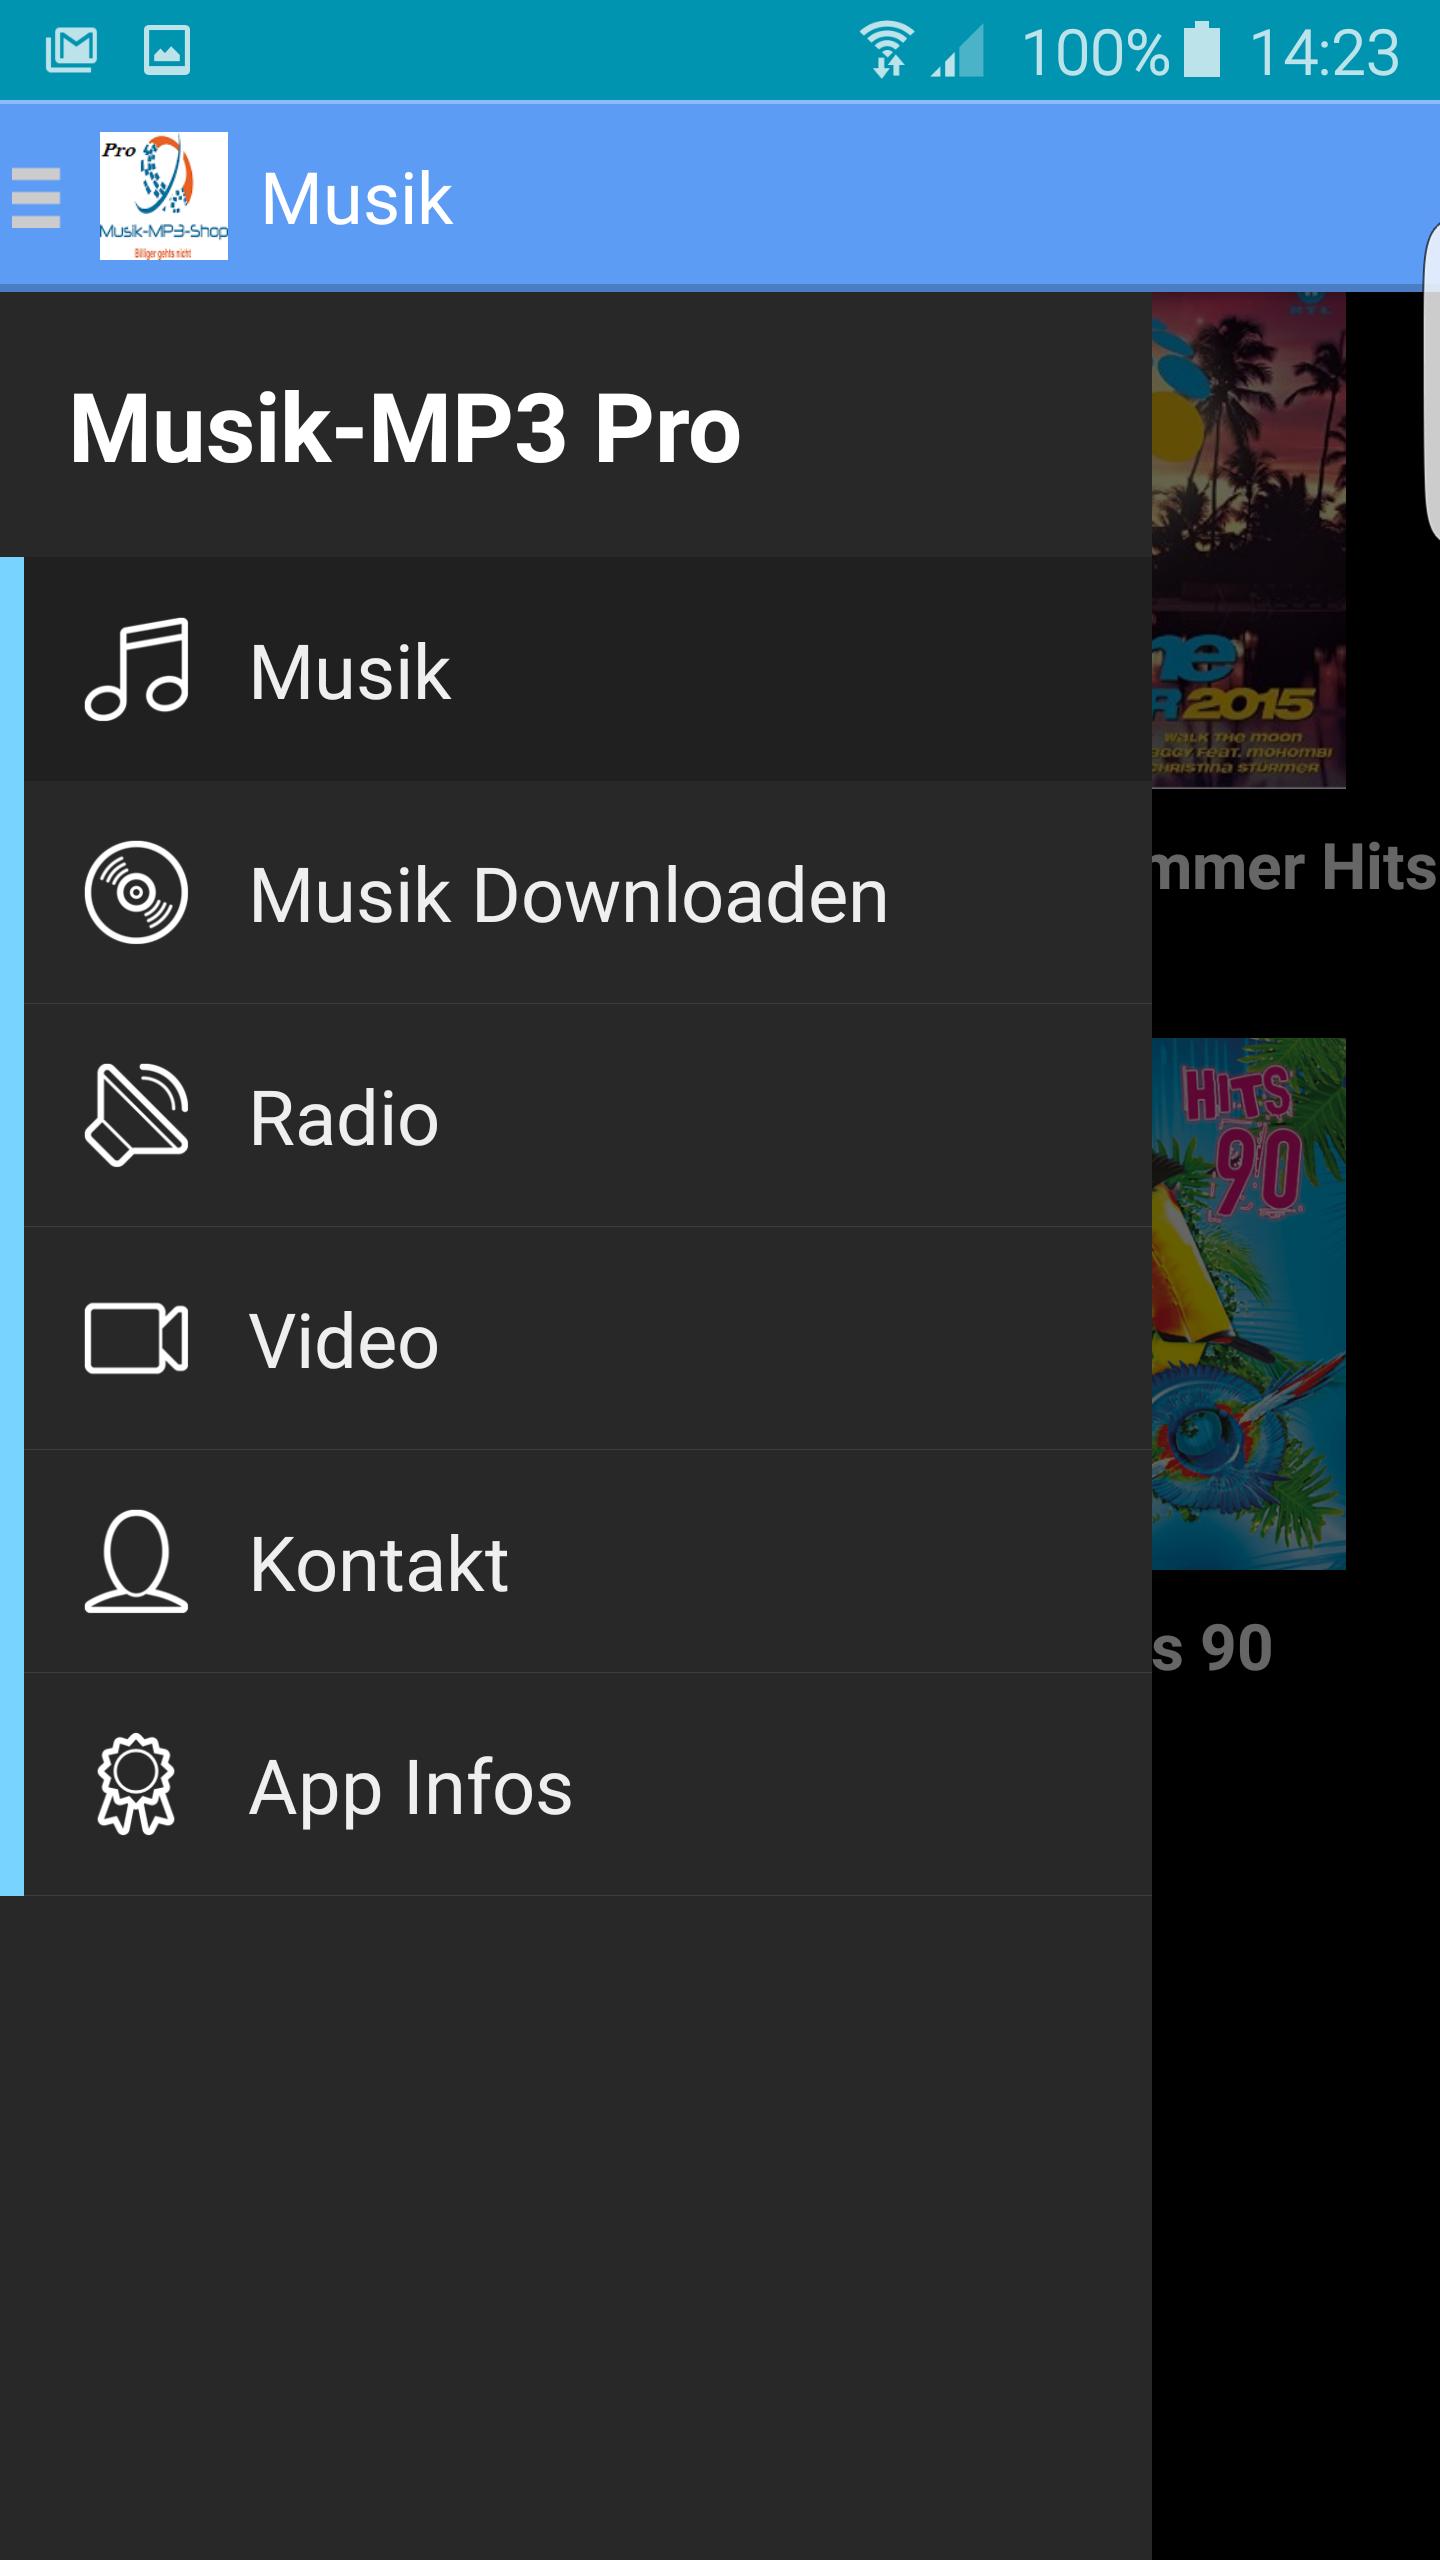 Musik MP3 Free for Android - APK Download